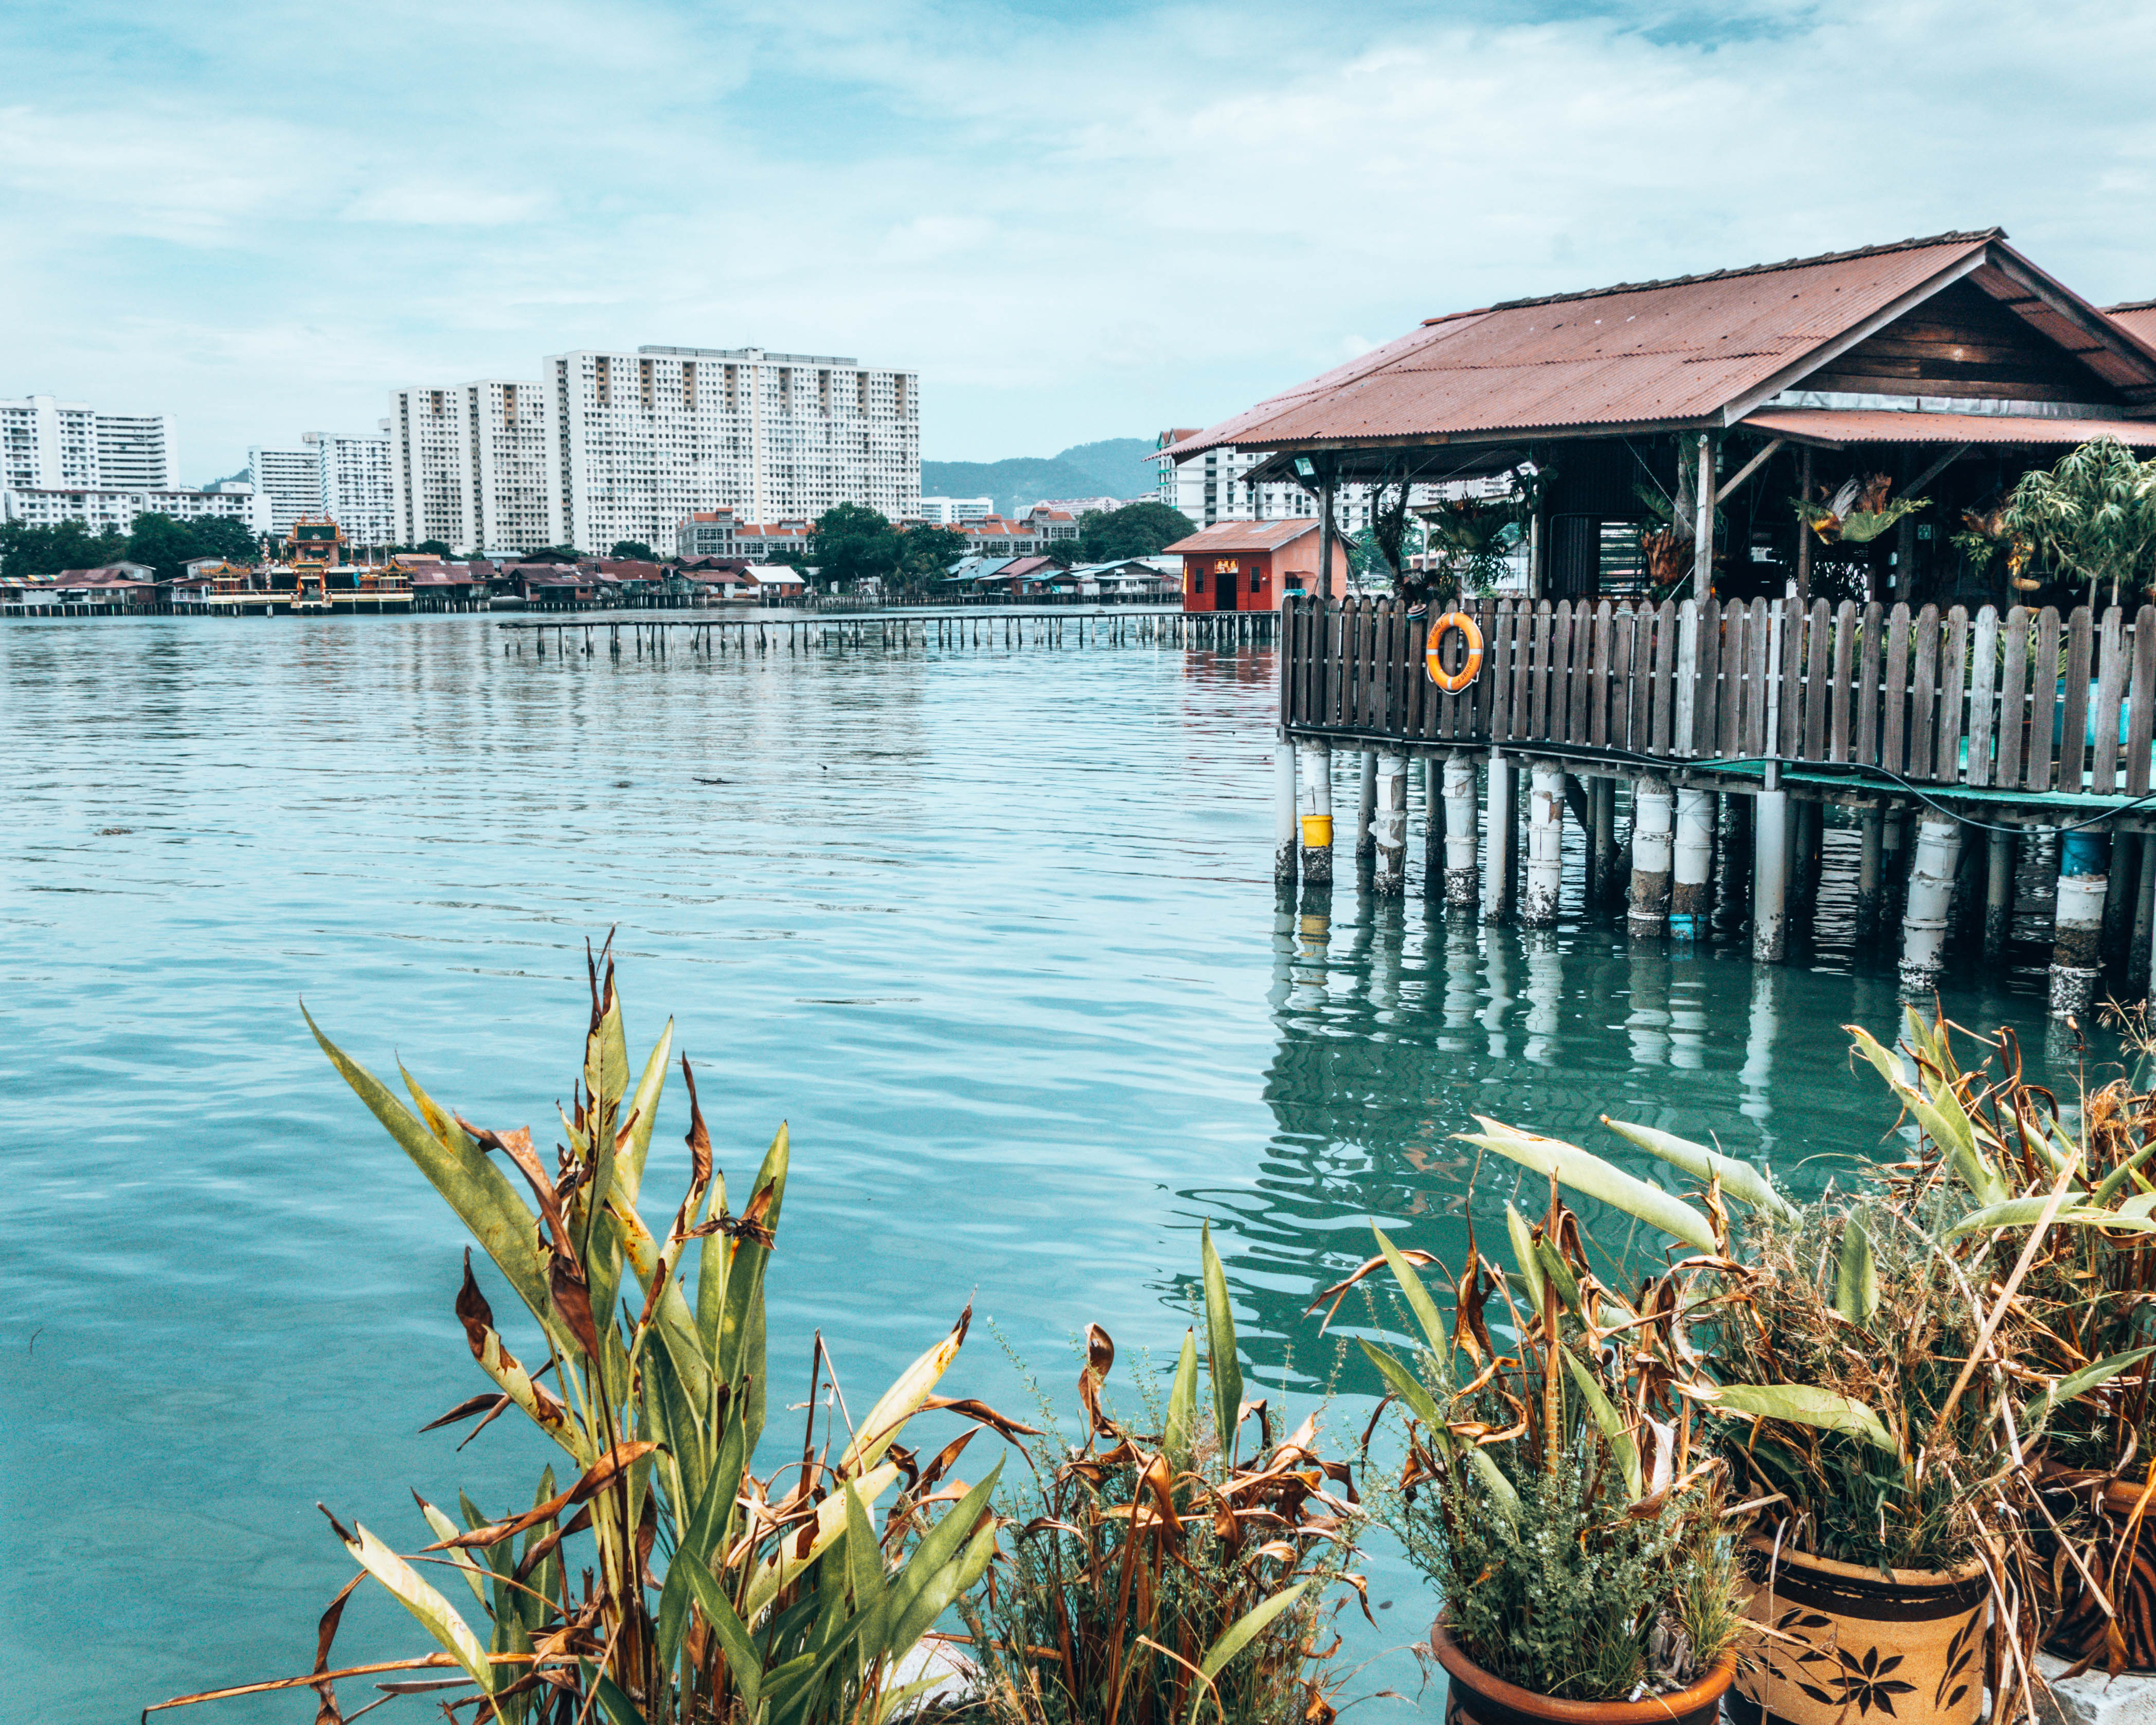 Clan Jetty. Guide for first trip to Penang - Wediditourway.com